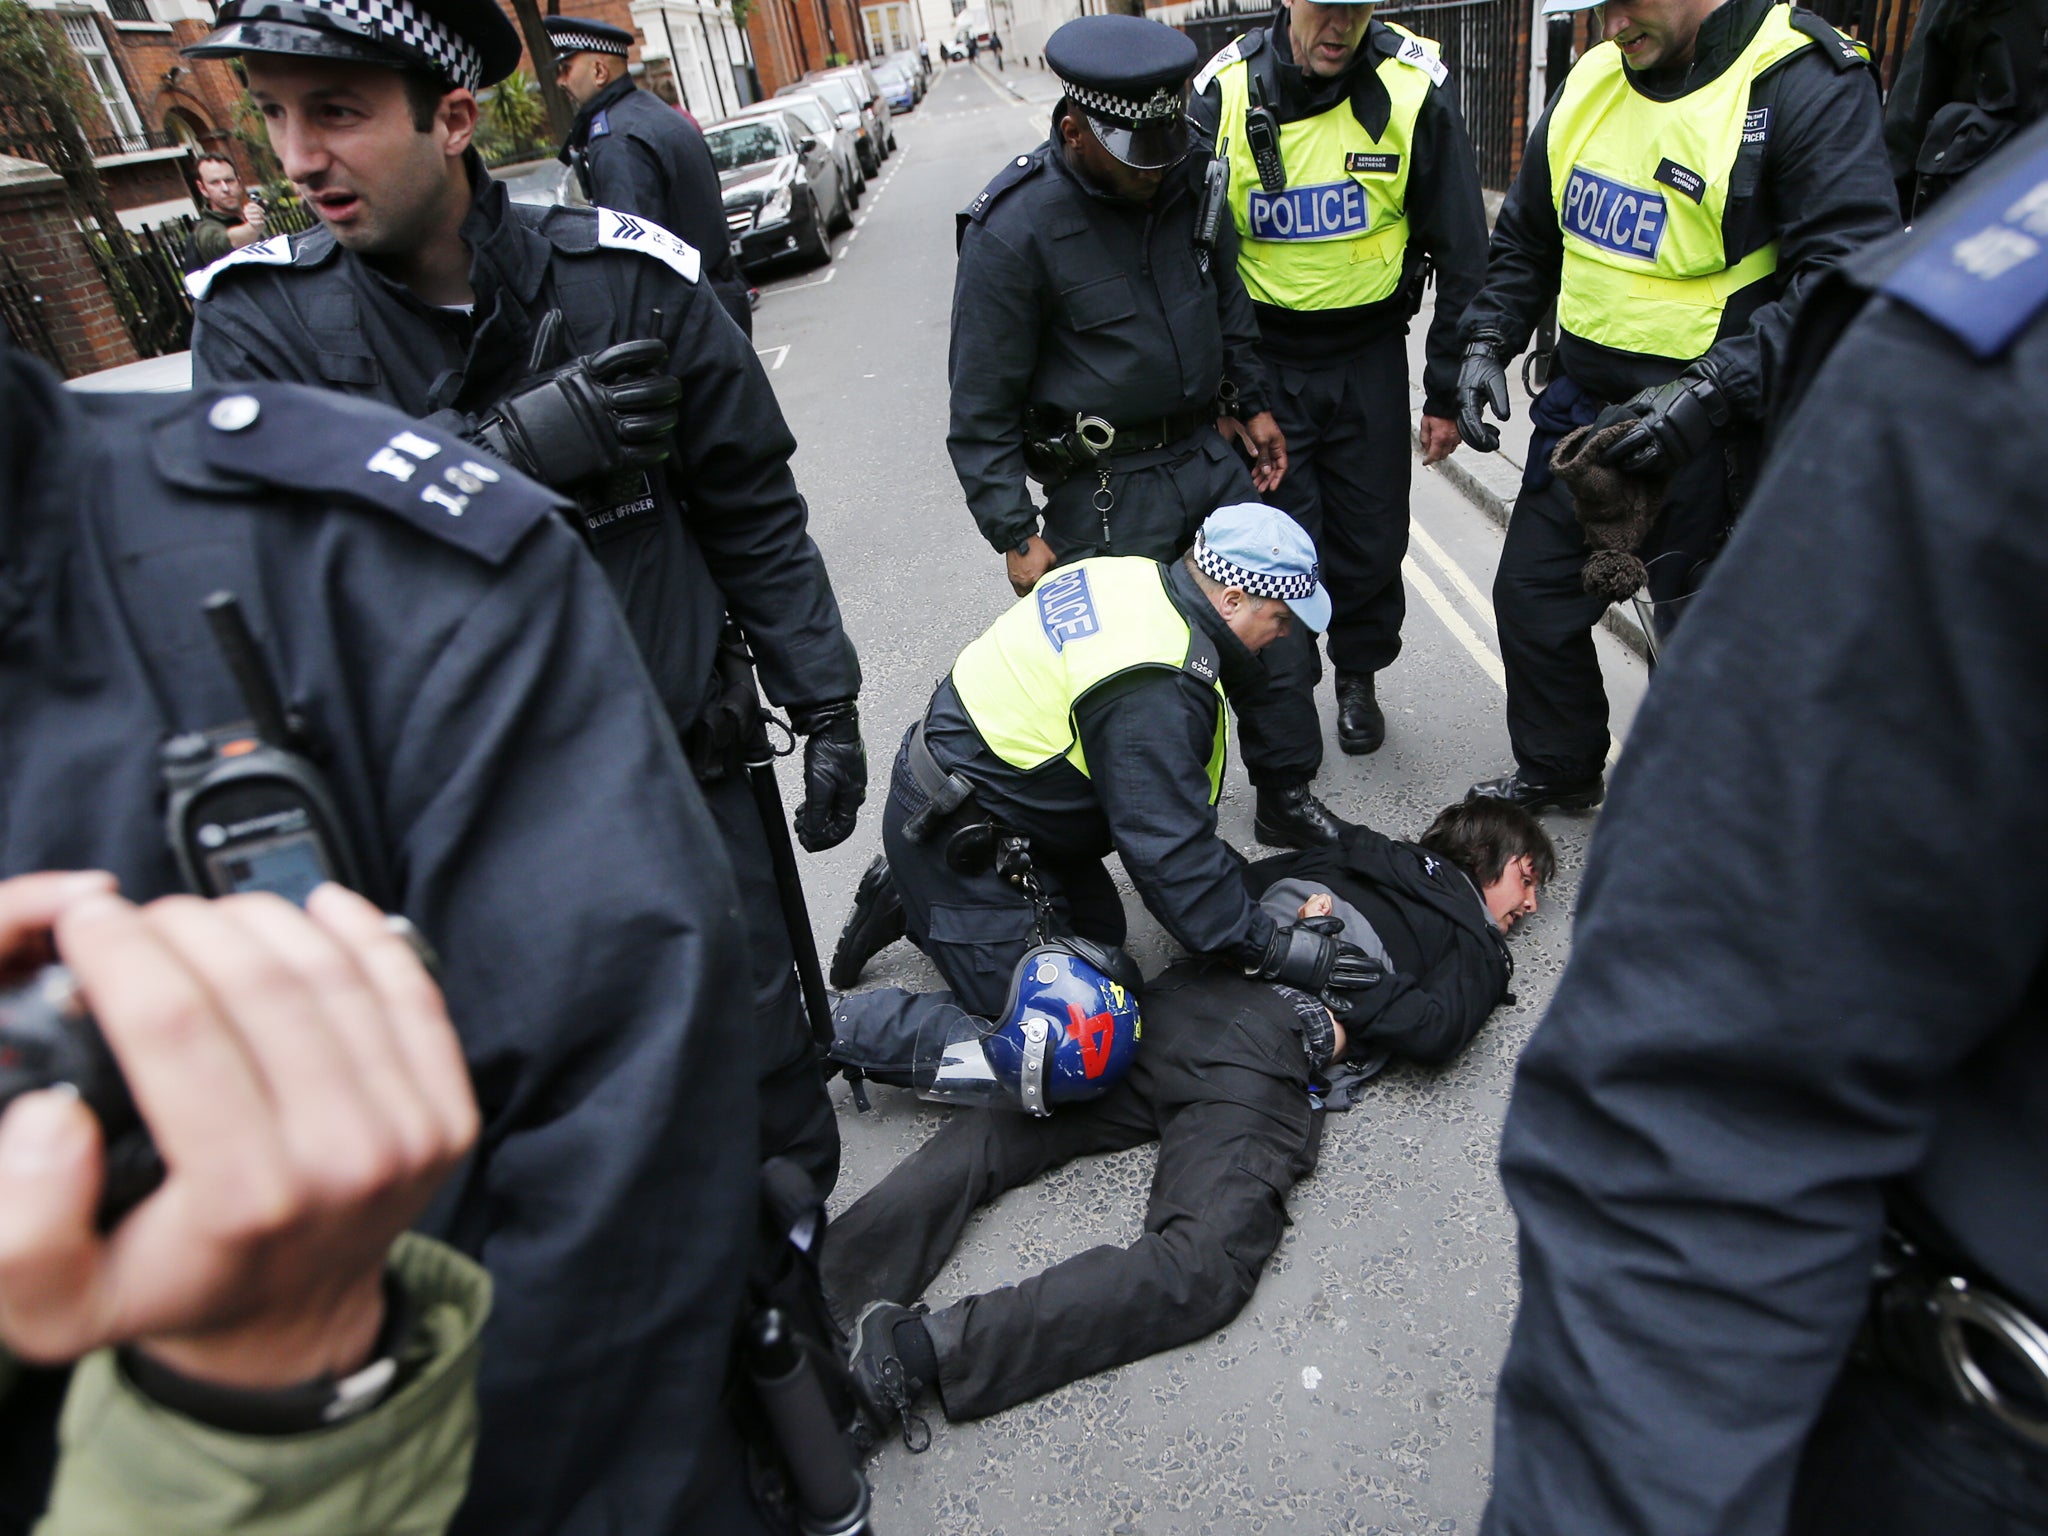 Police detain an anti-capitalist protester in London on 11 June 2013